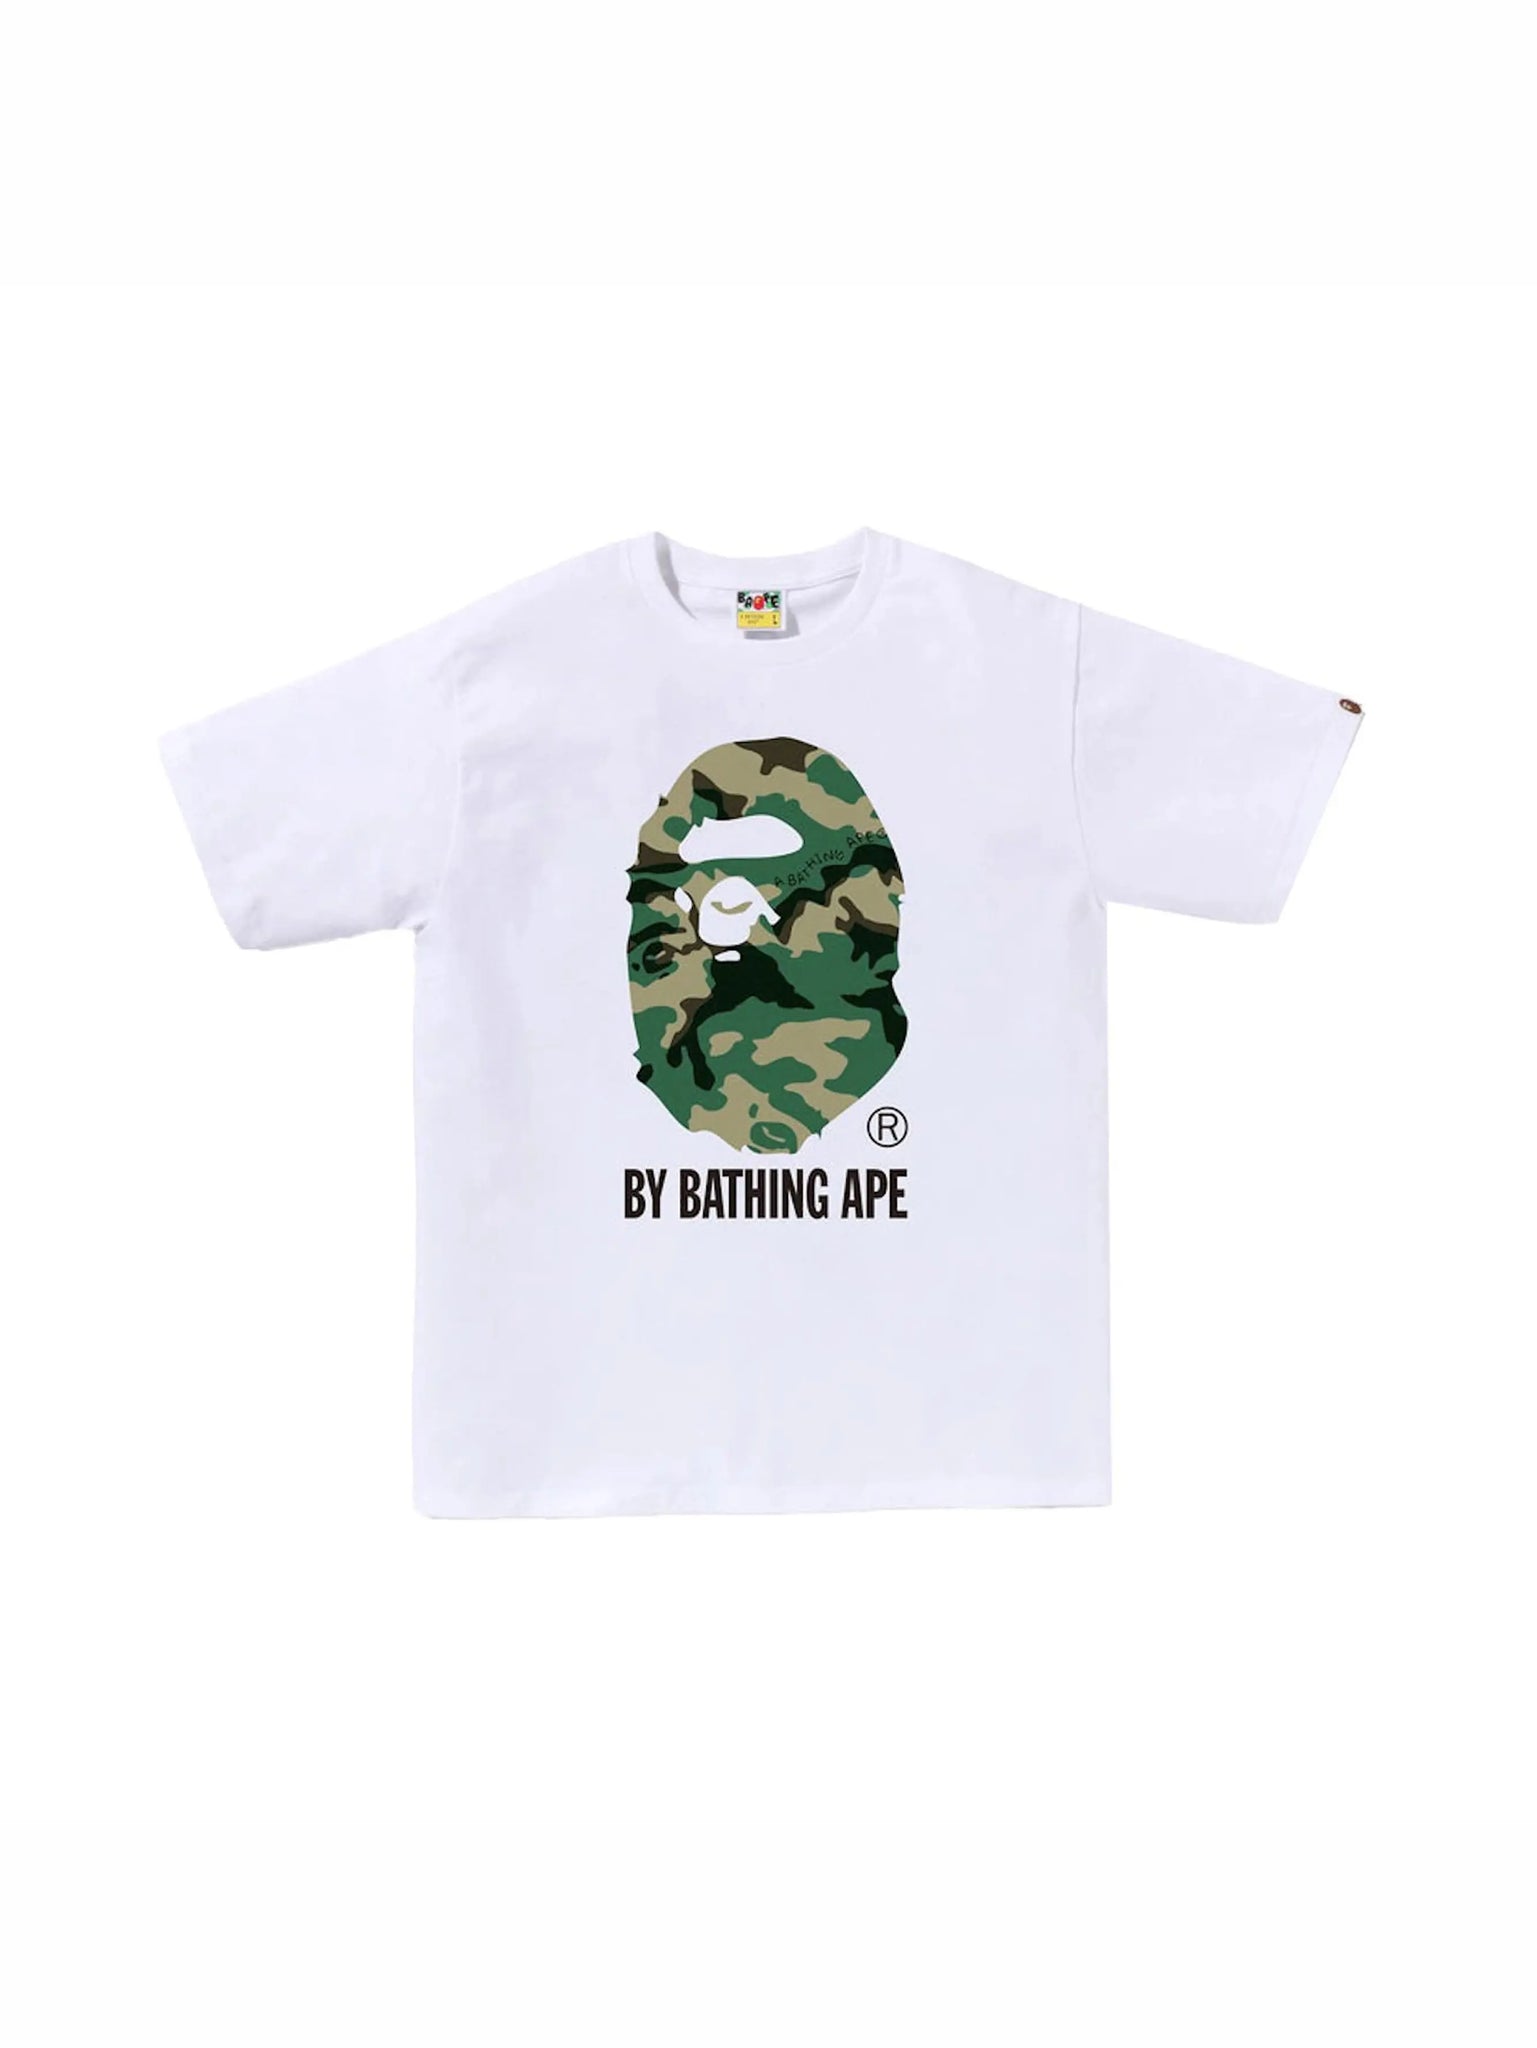 A Bathing Ape Woodland Camo By Bathing Ape Tee White in Melbourne, Australia - Prior